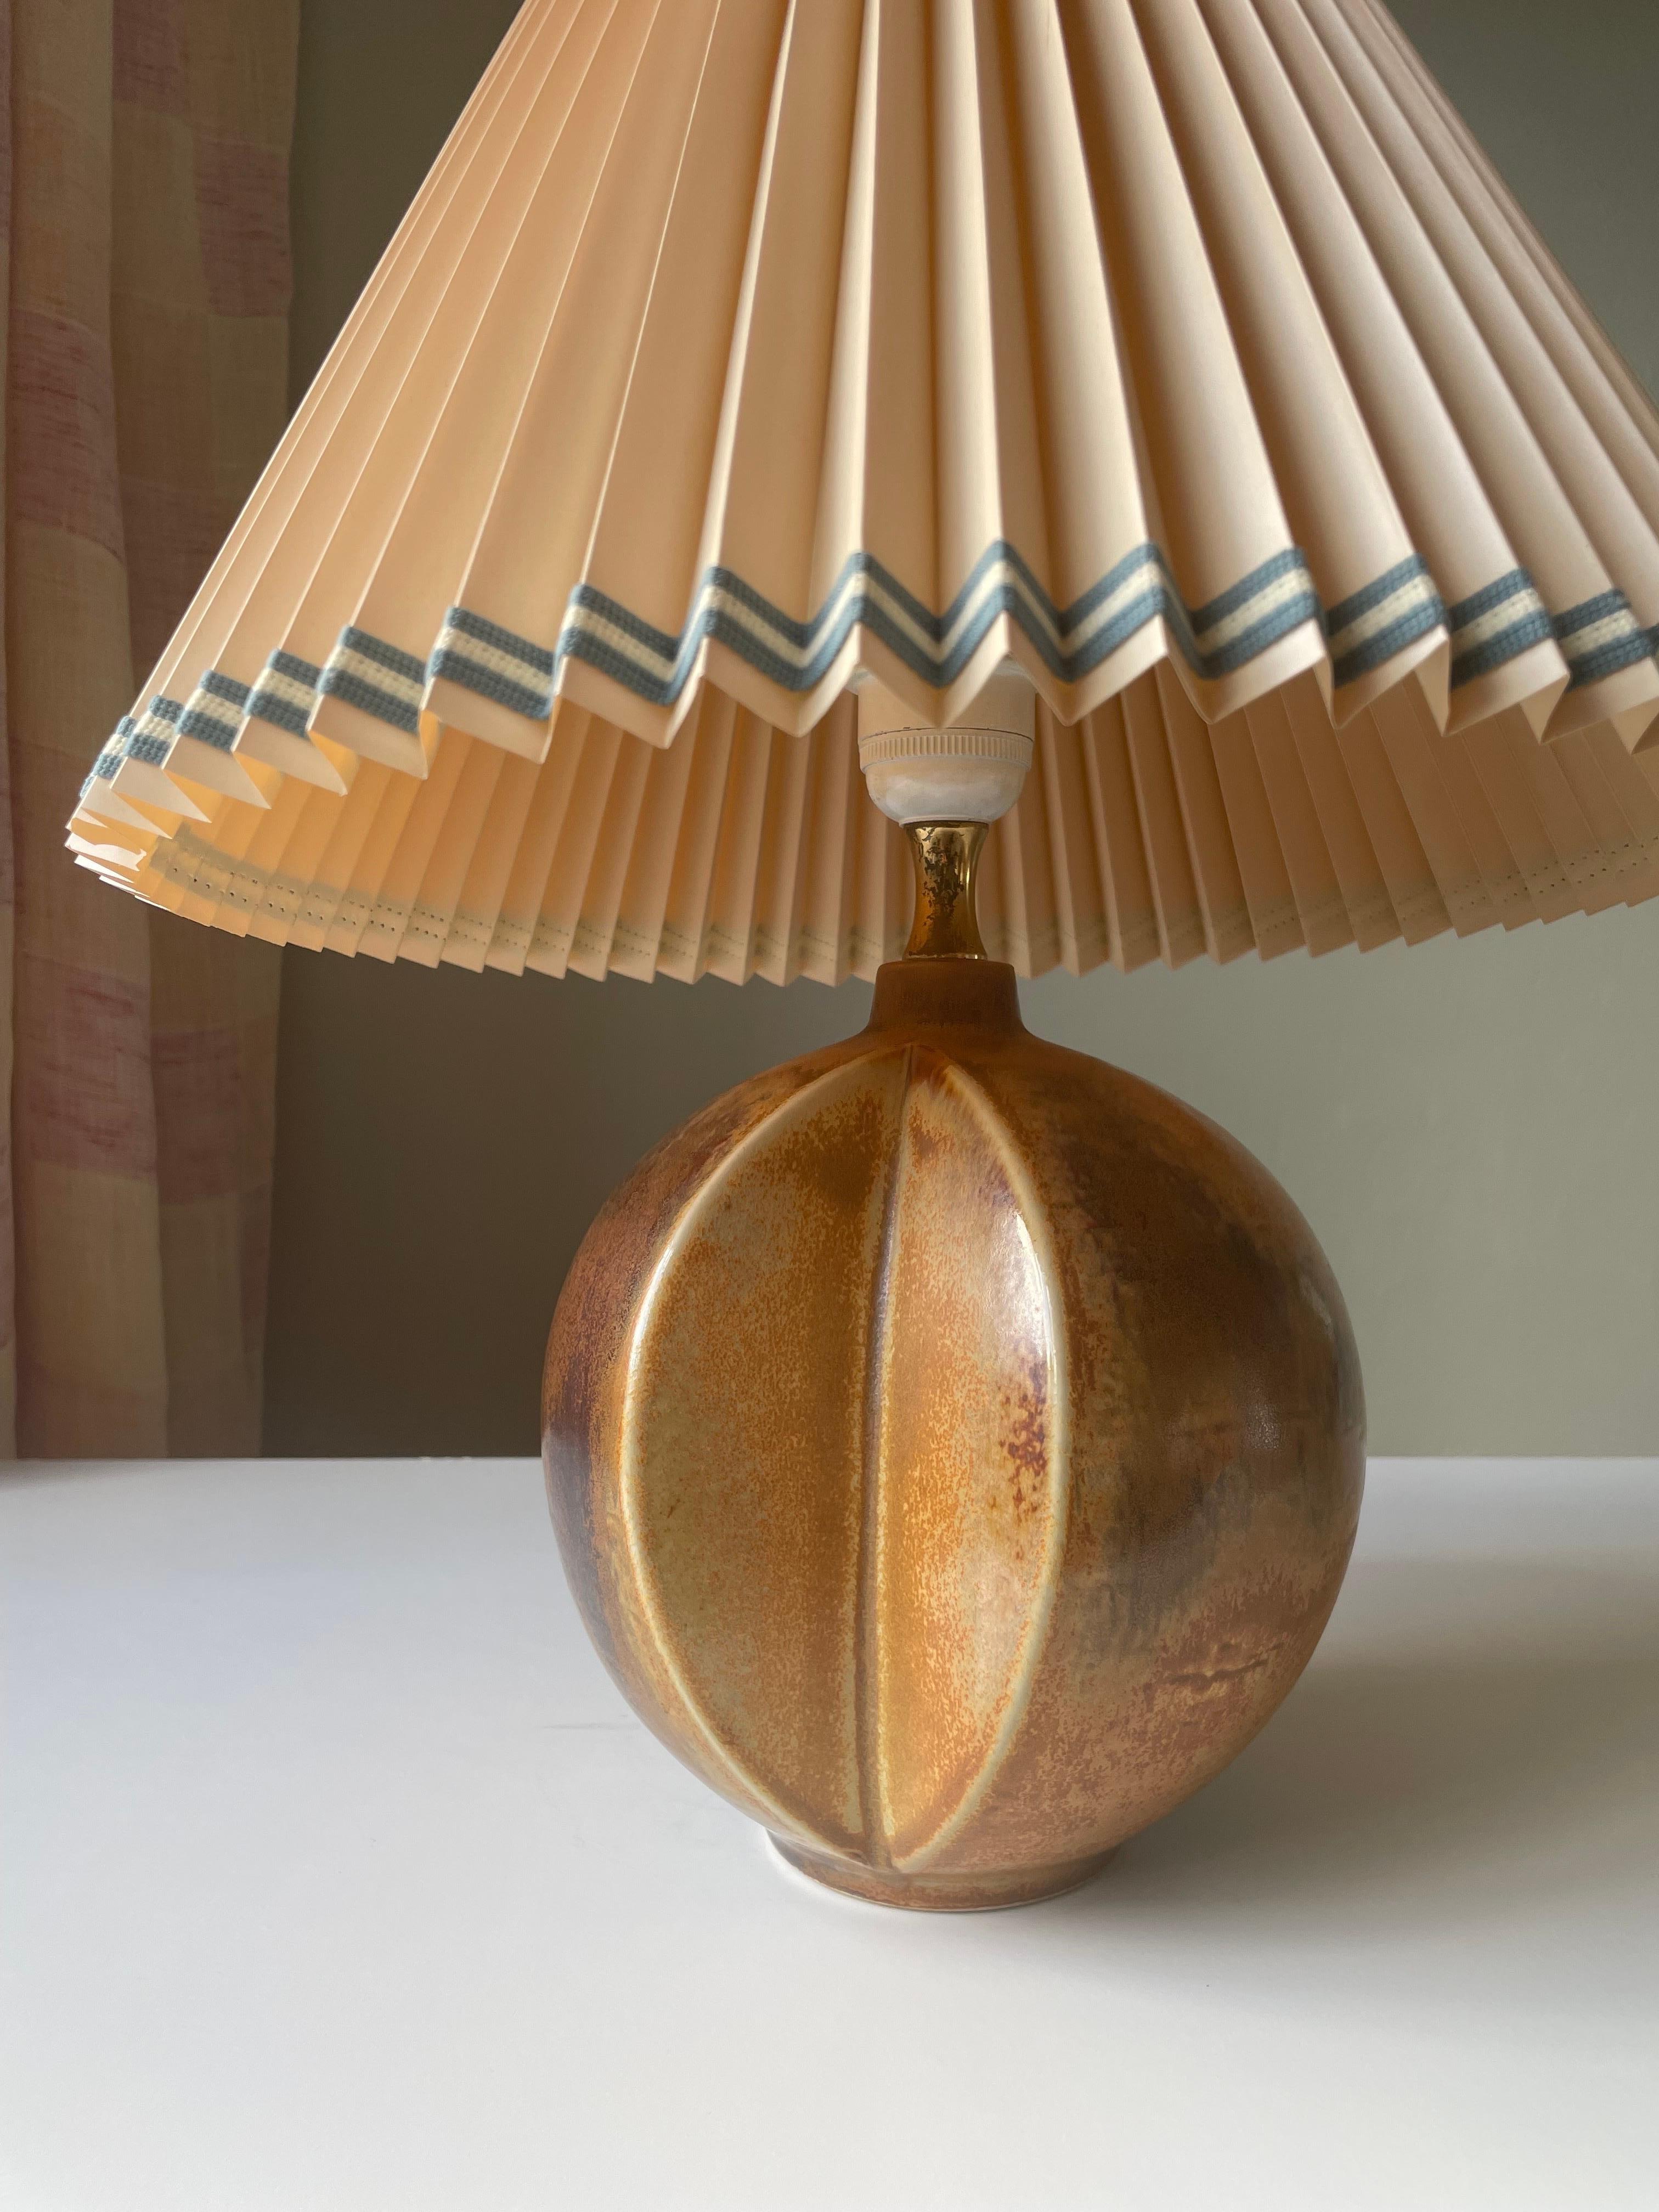 Golden chestnut brown, amber and black colored globe shaped ceramic table lamp with two sculptural 